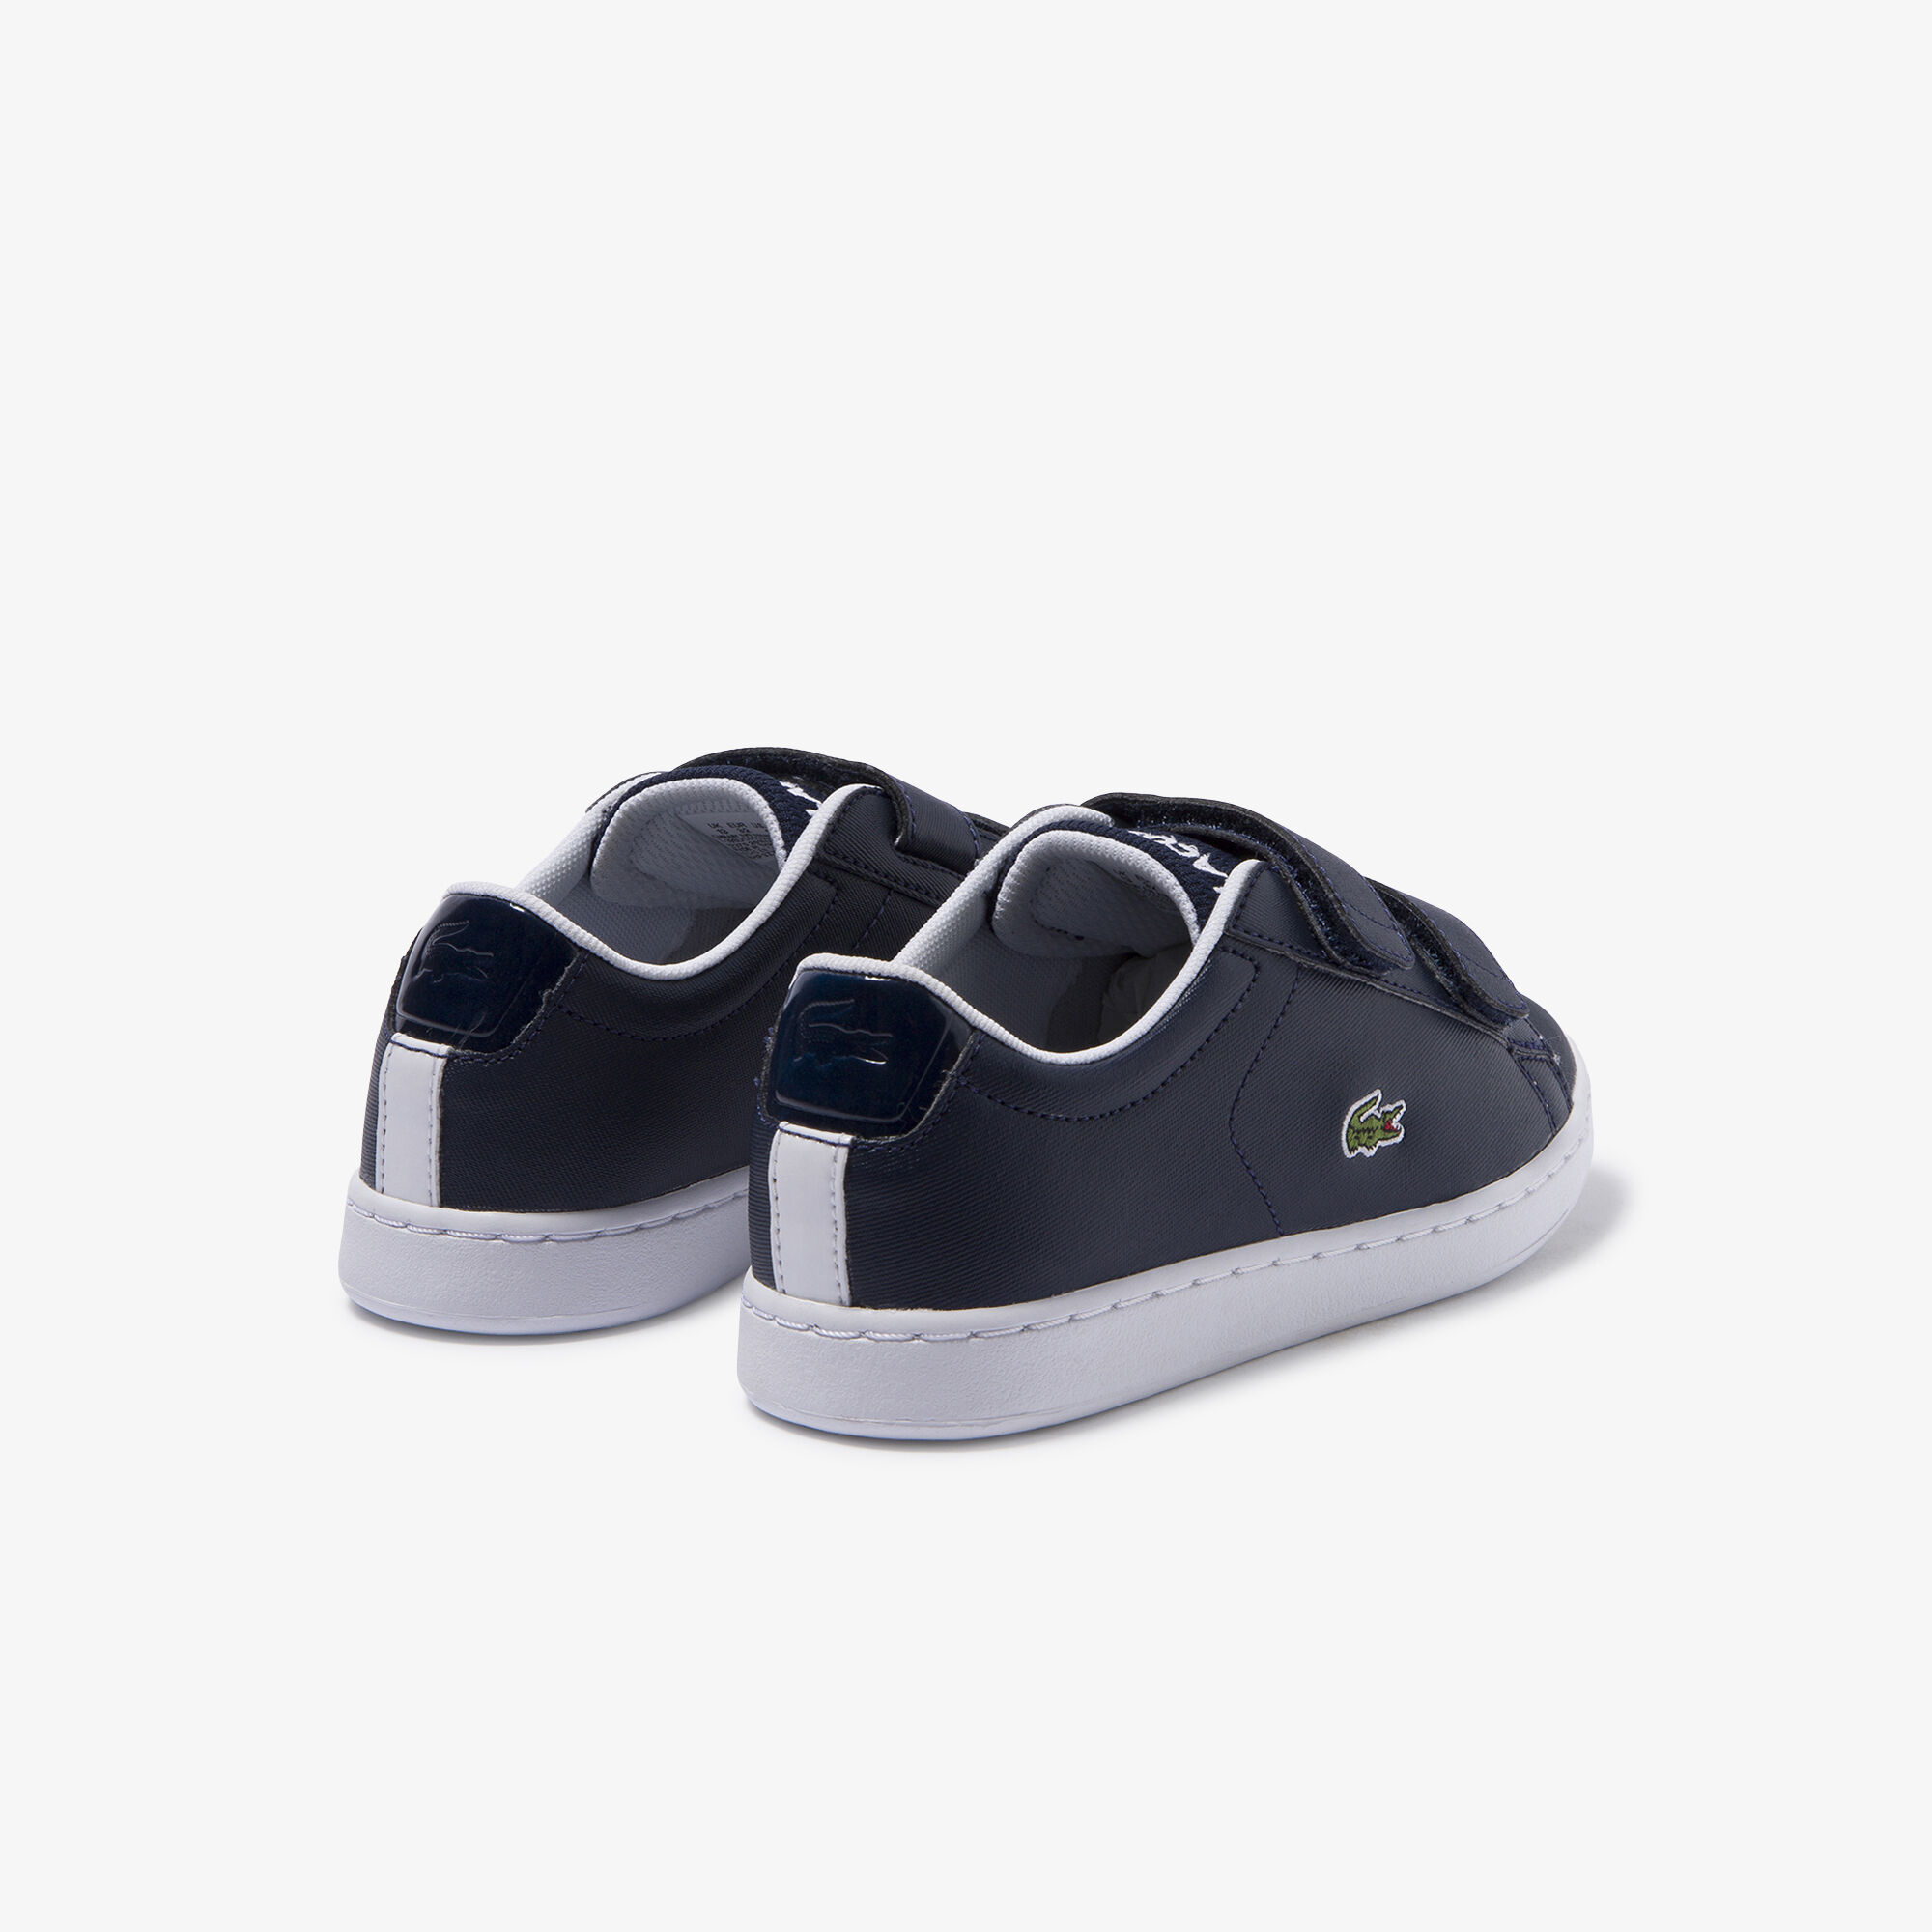 Children's Carnaby Evo Strap Tonal Synthetic Sneakers